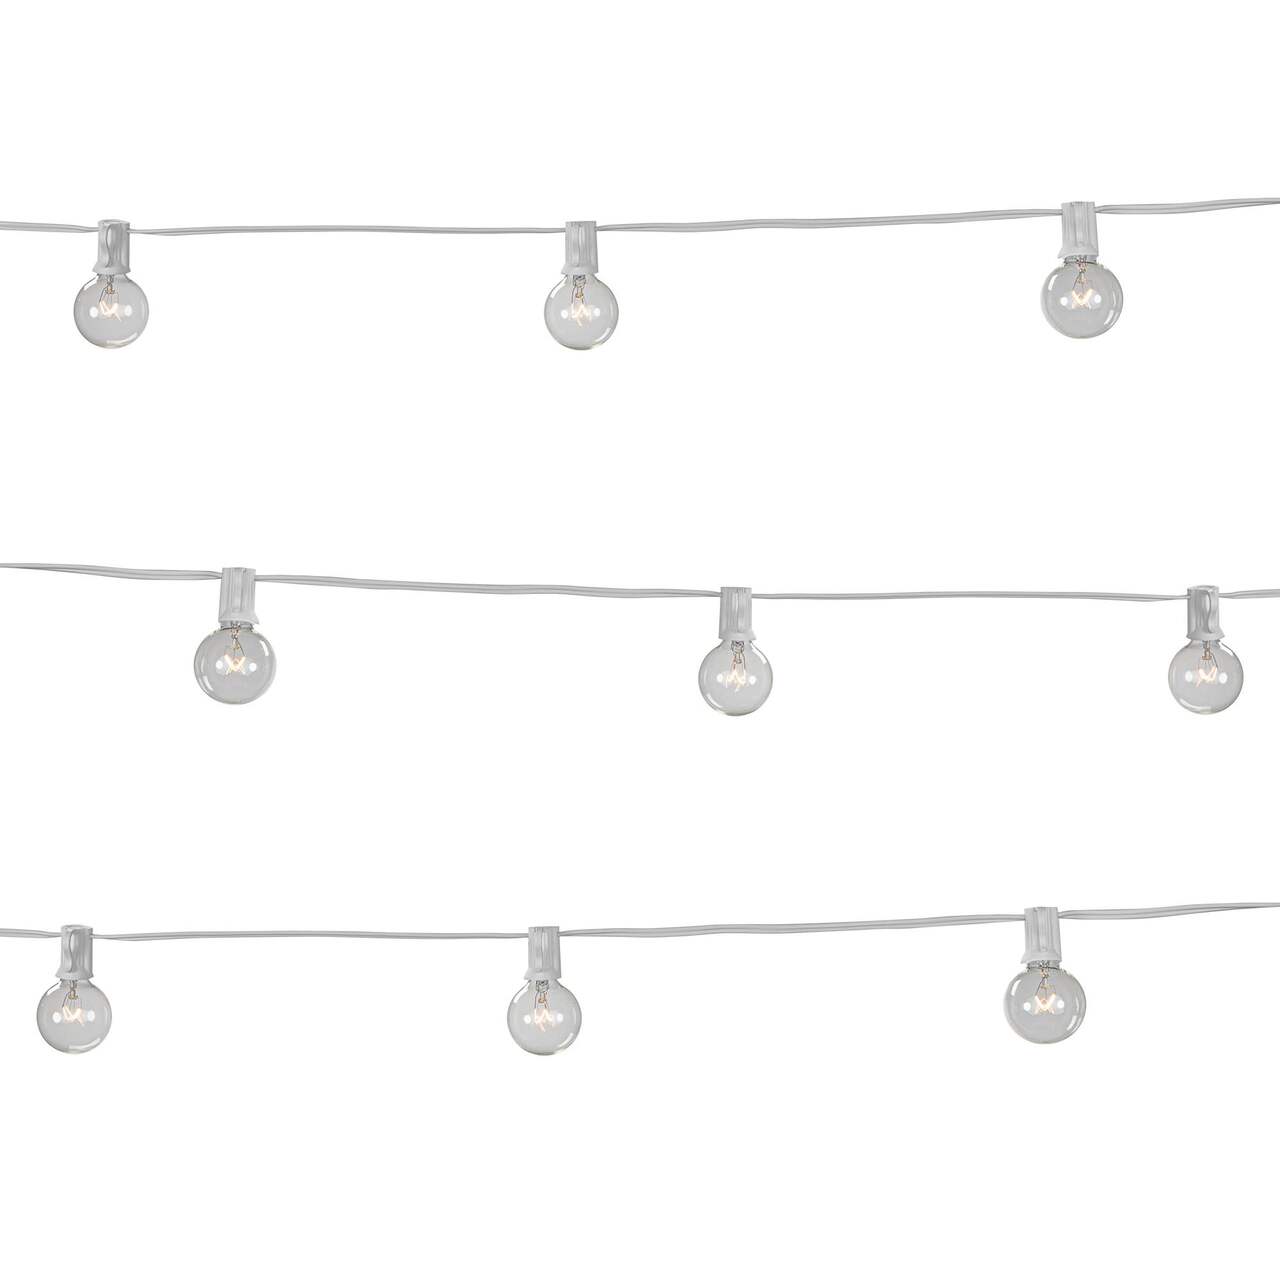 Electric Café String Lights with 10 Silver Metal Shades